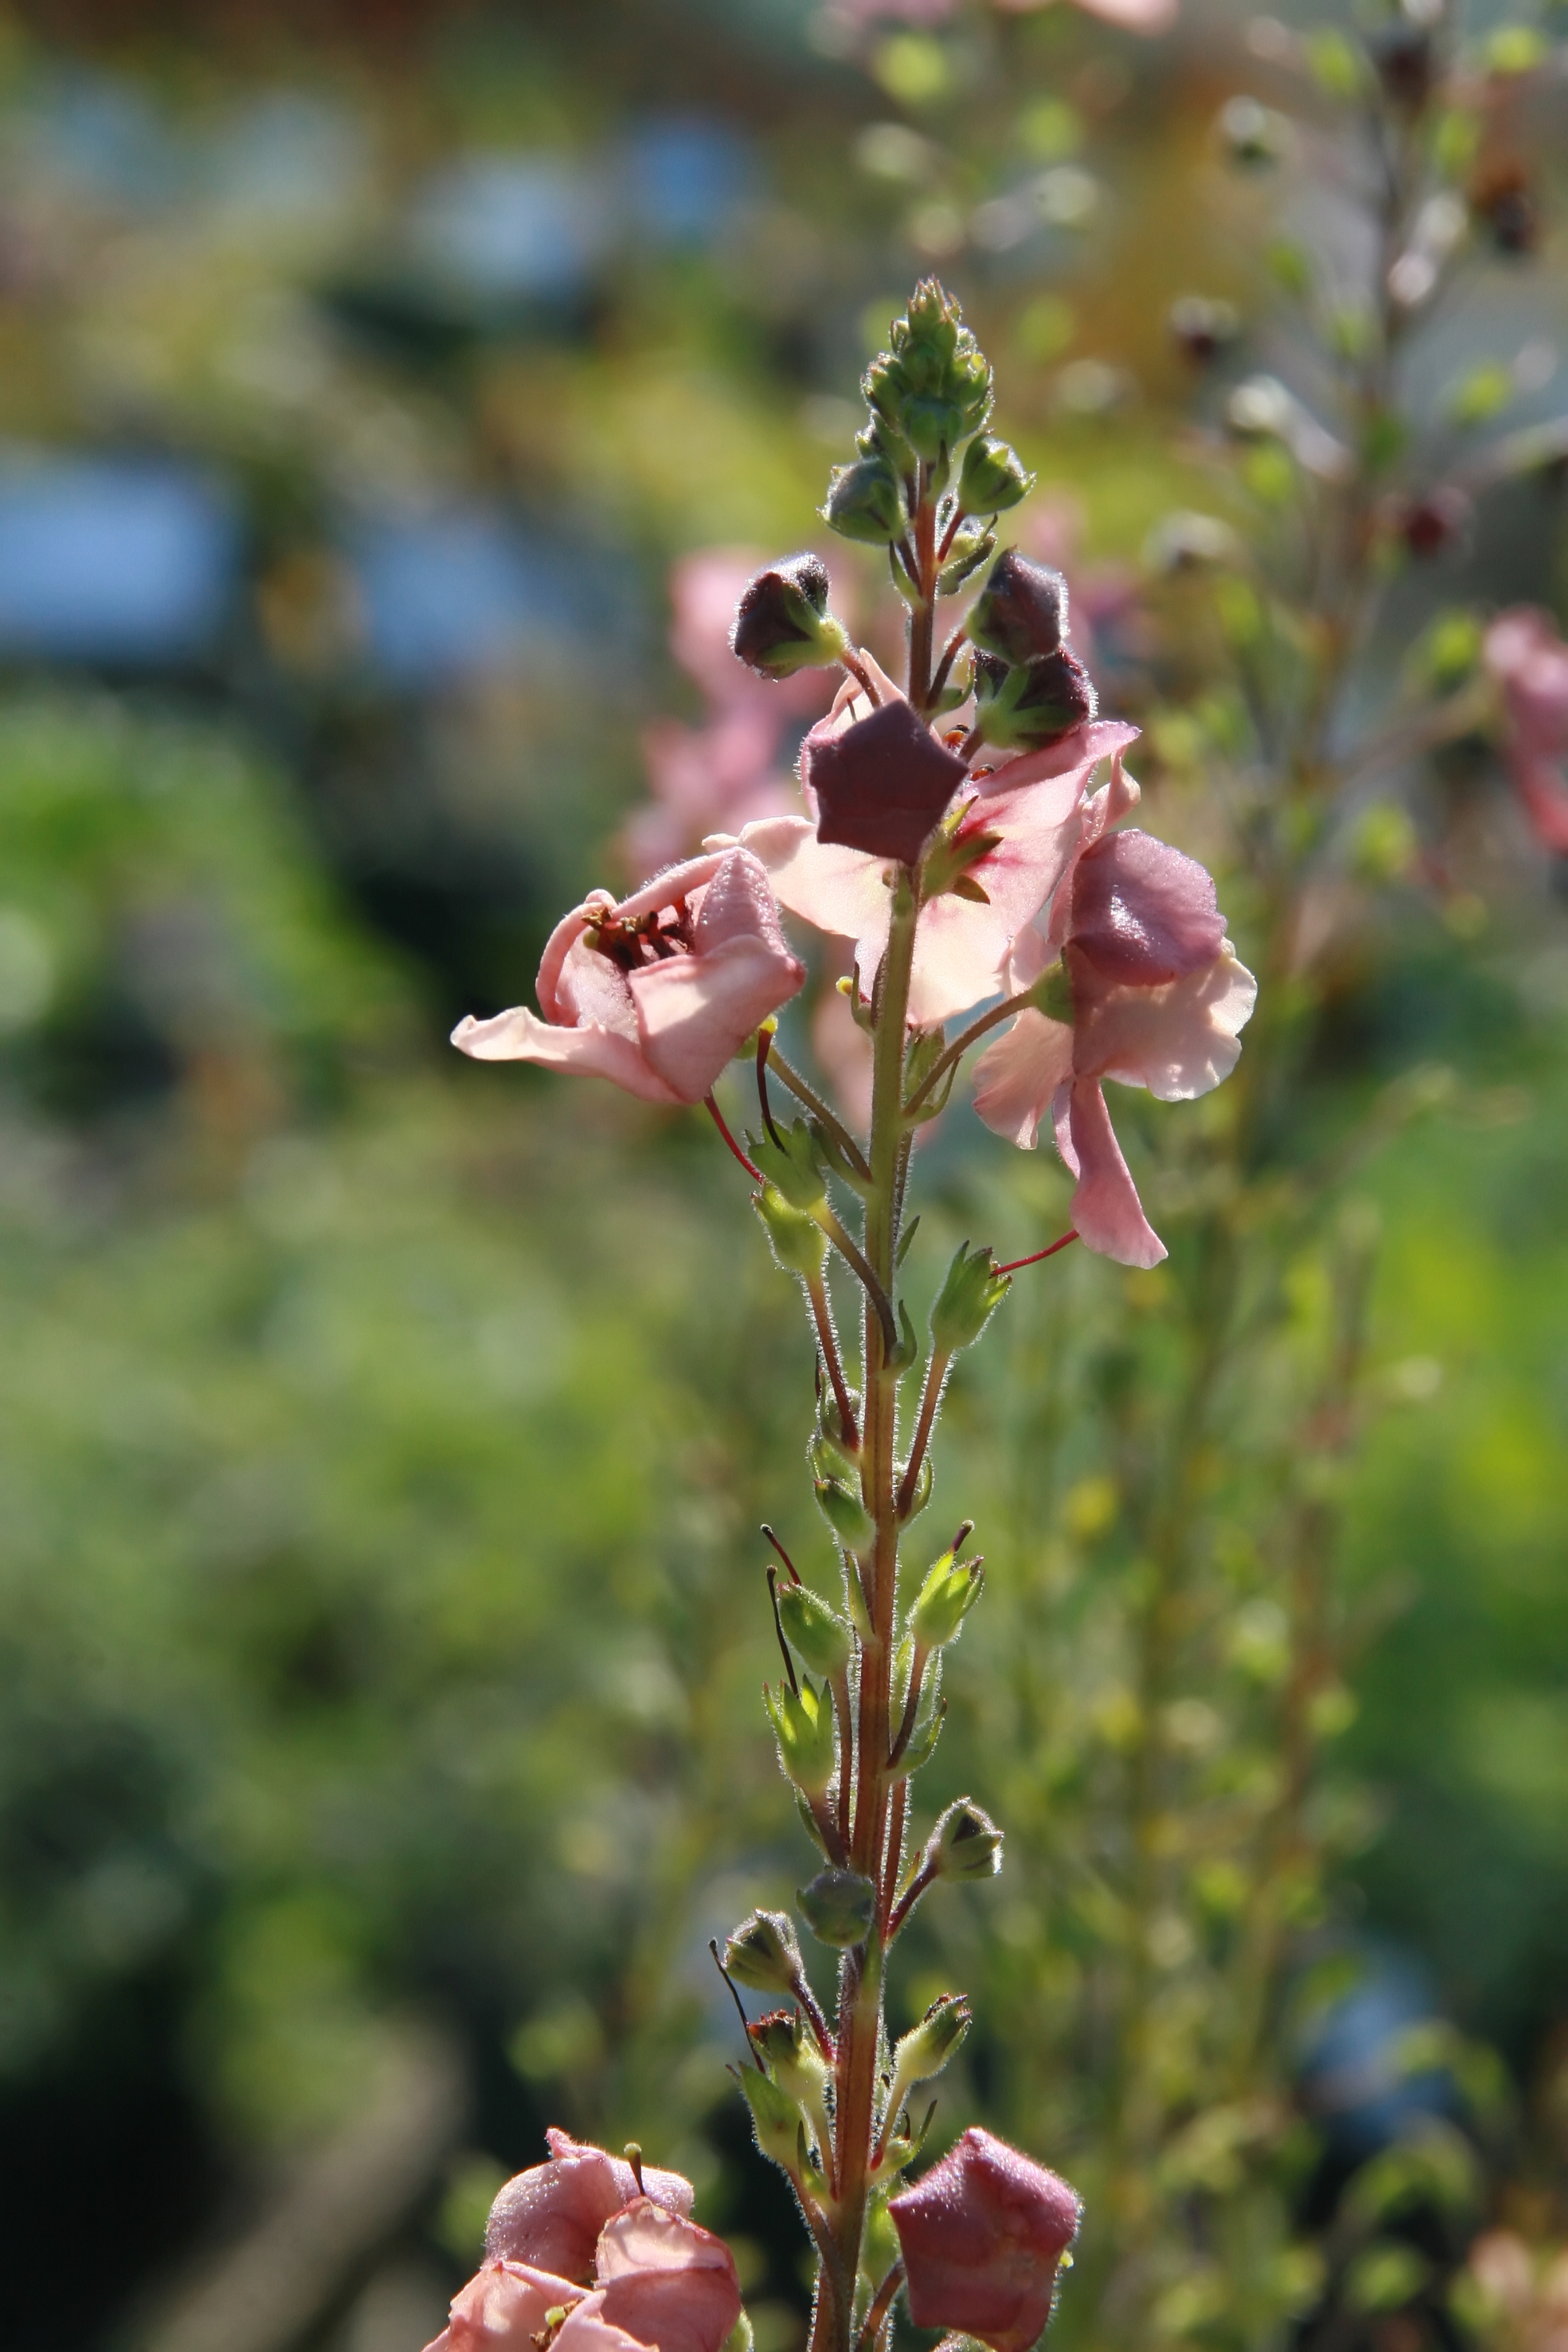 pink flowers with dark-pink stamens, purple-green buds, lime sepals and green-brown stem
